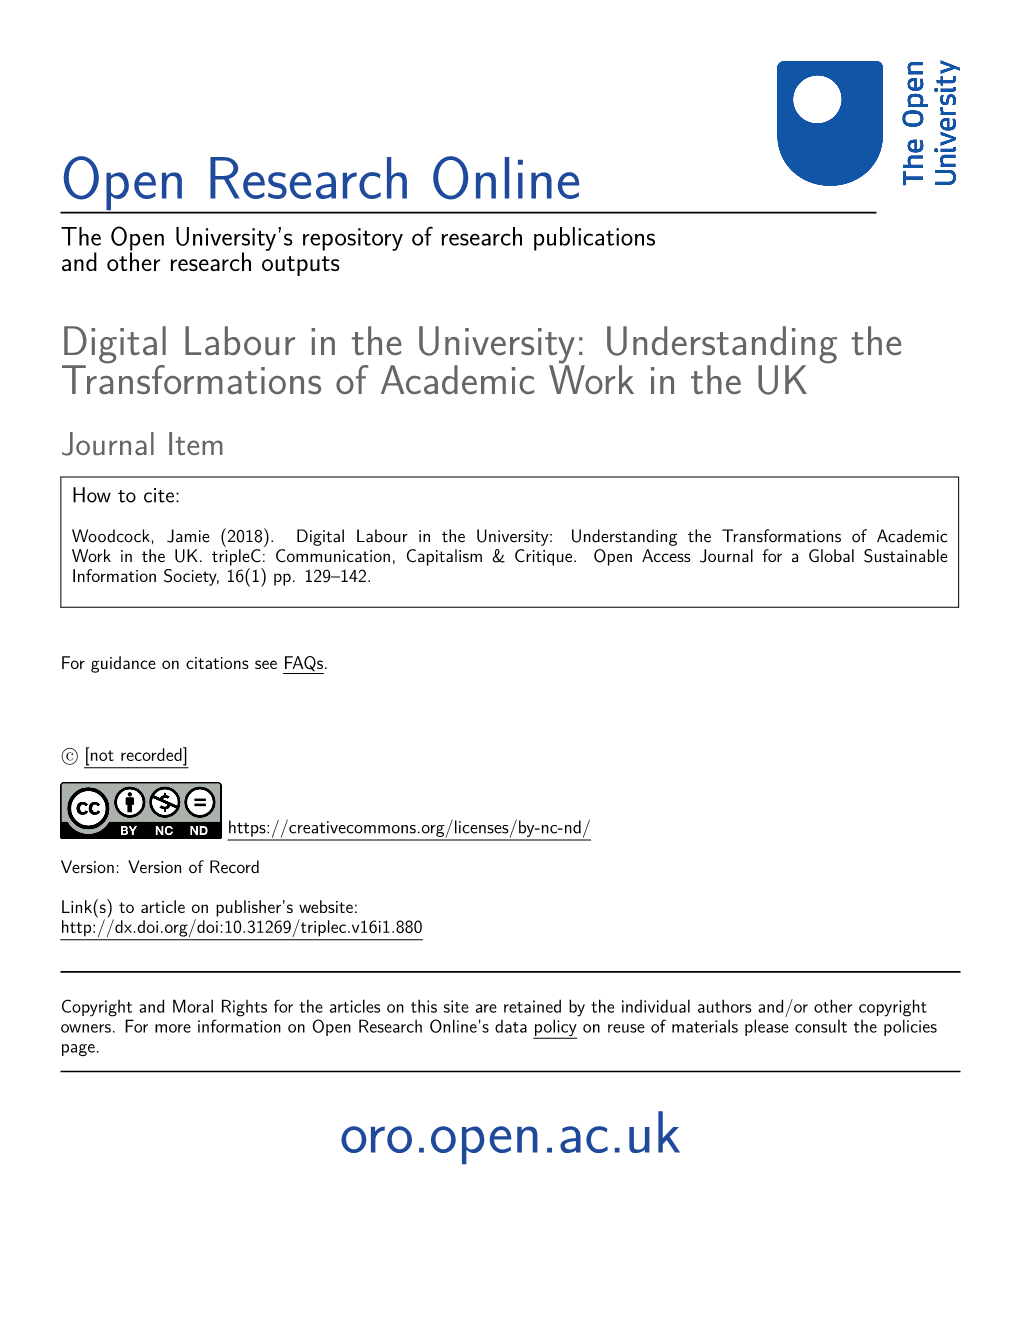 Digital Labour in the University: Understanding the Transformations of Academic Work in the UK Journal Item